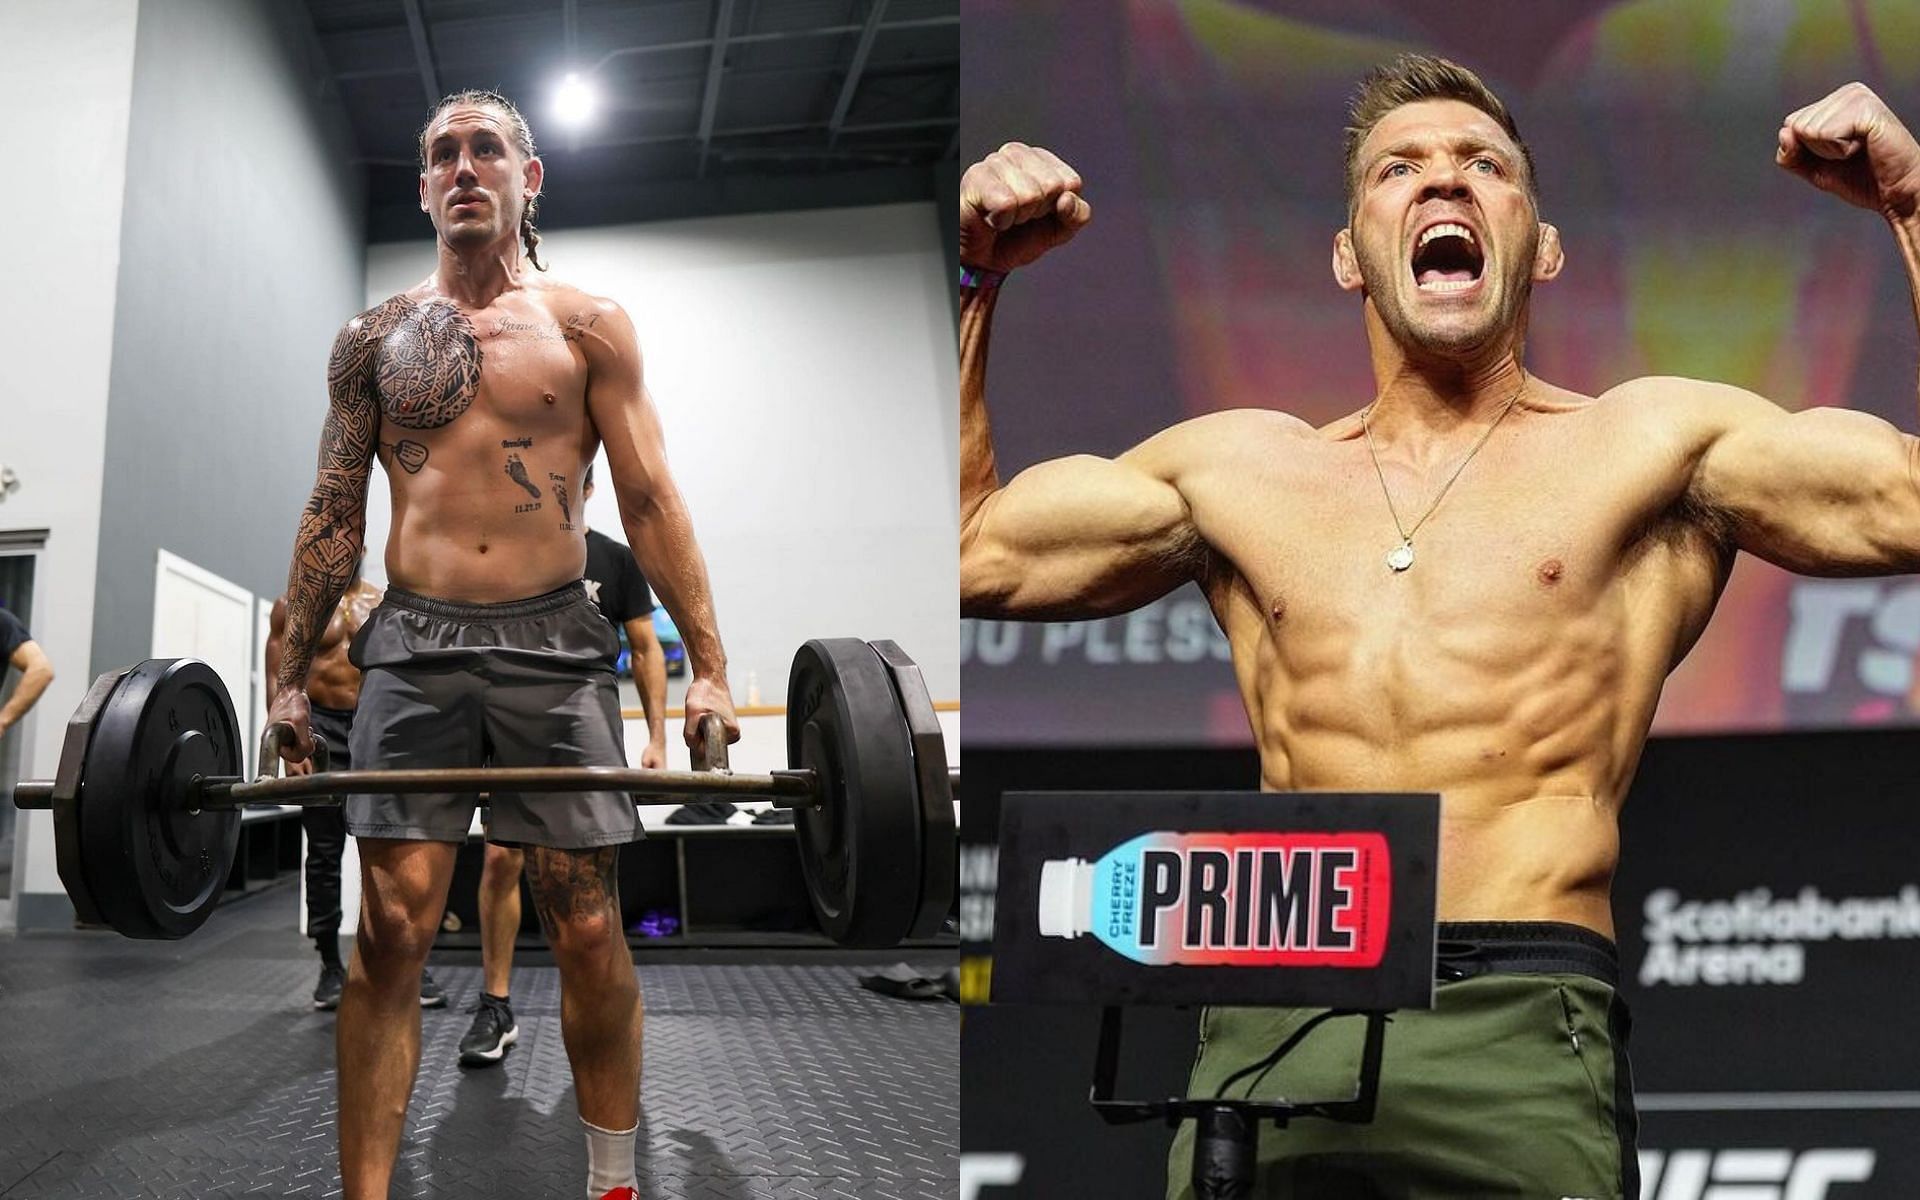 According to Brendan Allen (left), Dricus du Plessis (right) is undeserving of the middleweight title [Images courtesy: @b_allen185 and @dricusduplessis on Instagram]